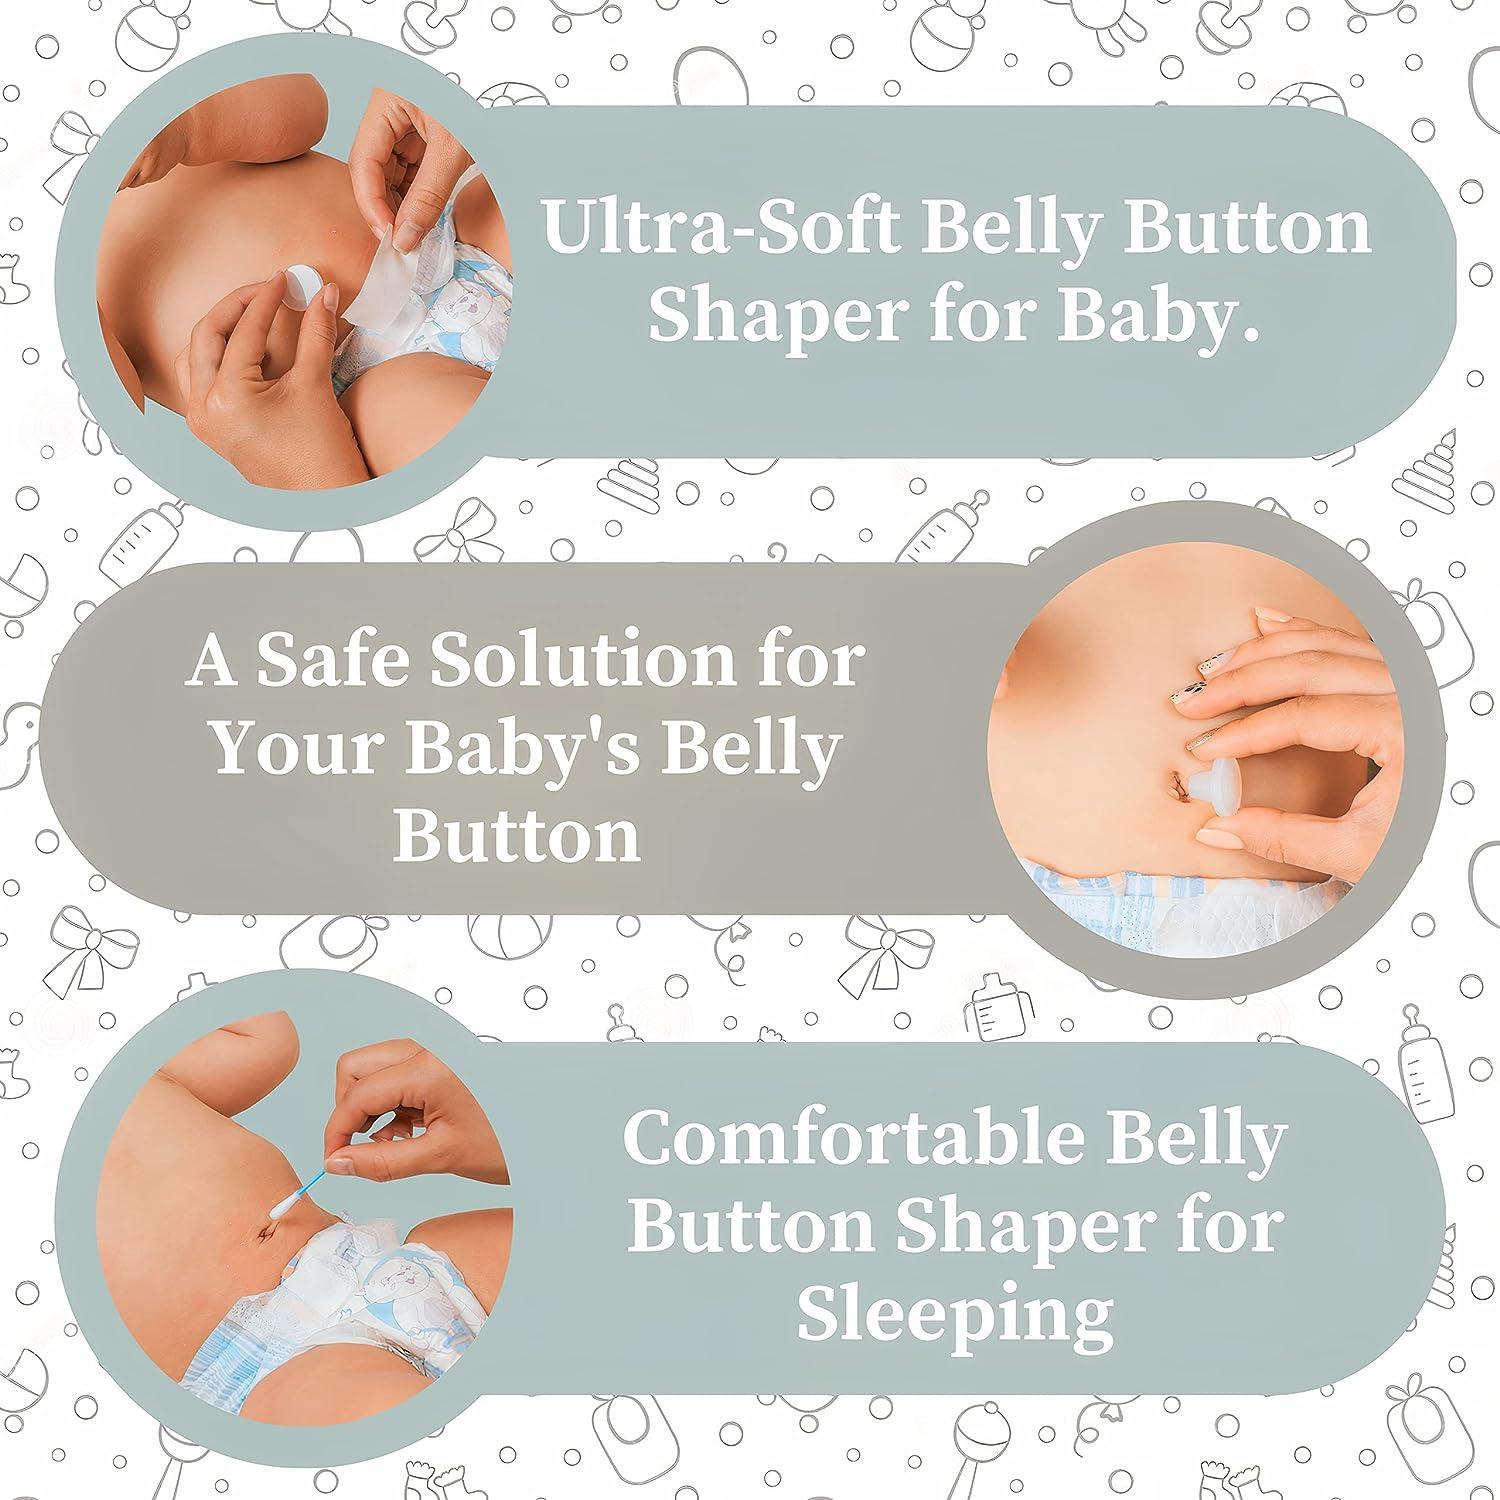 twins dream Baby Button Shaper plug, Works with baby belly band for hernia, umbilical hernia belt baby